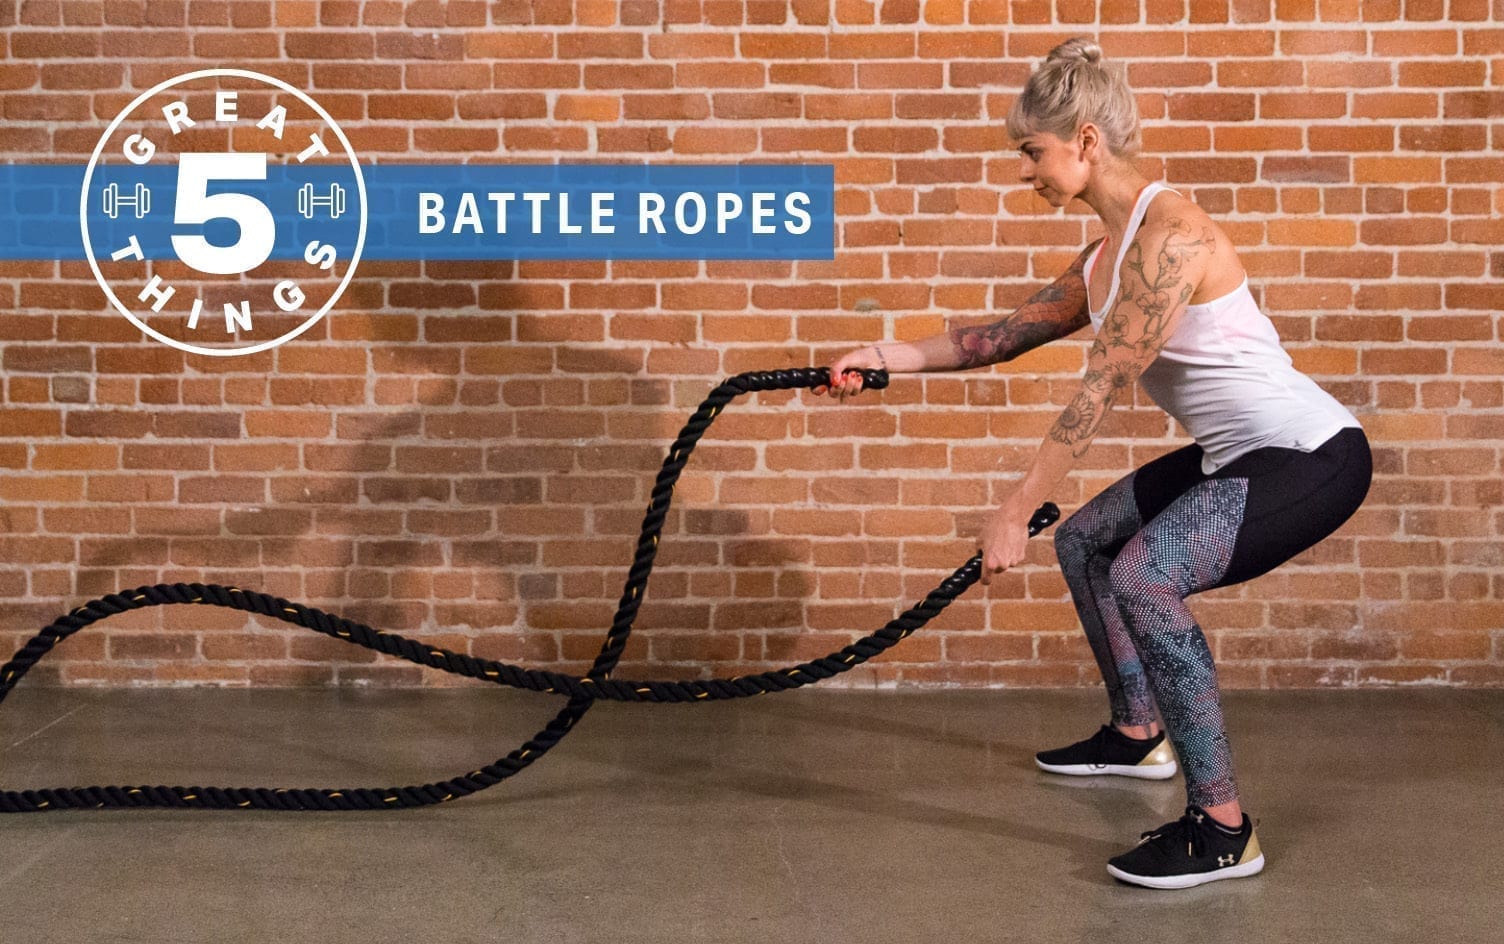 https://blog.myfitnesspal.com/wp-content/uploads/2019/07/UACF-5-Great-Things-Featured-ropes.jpg